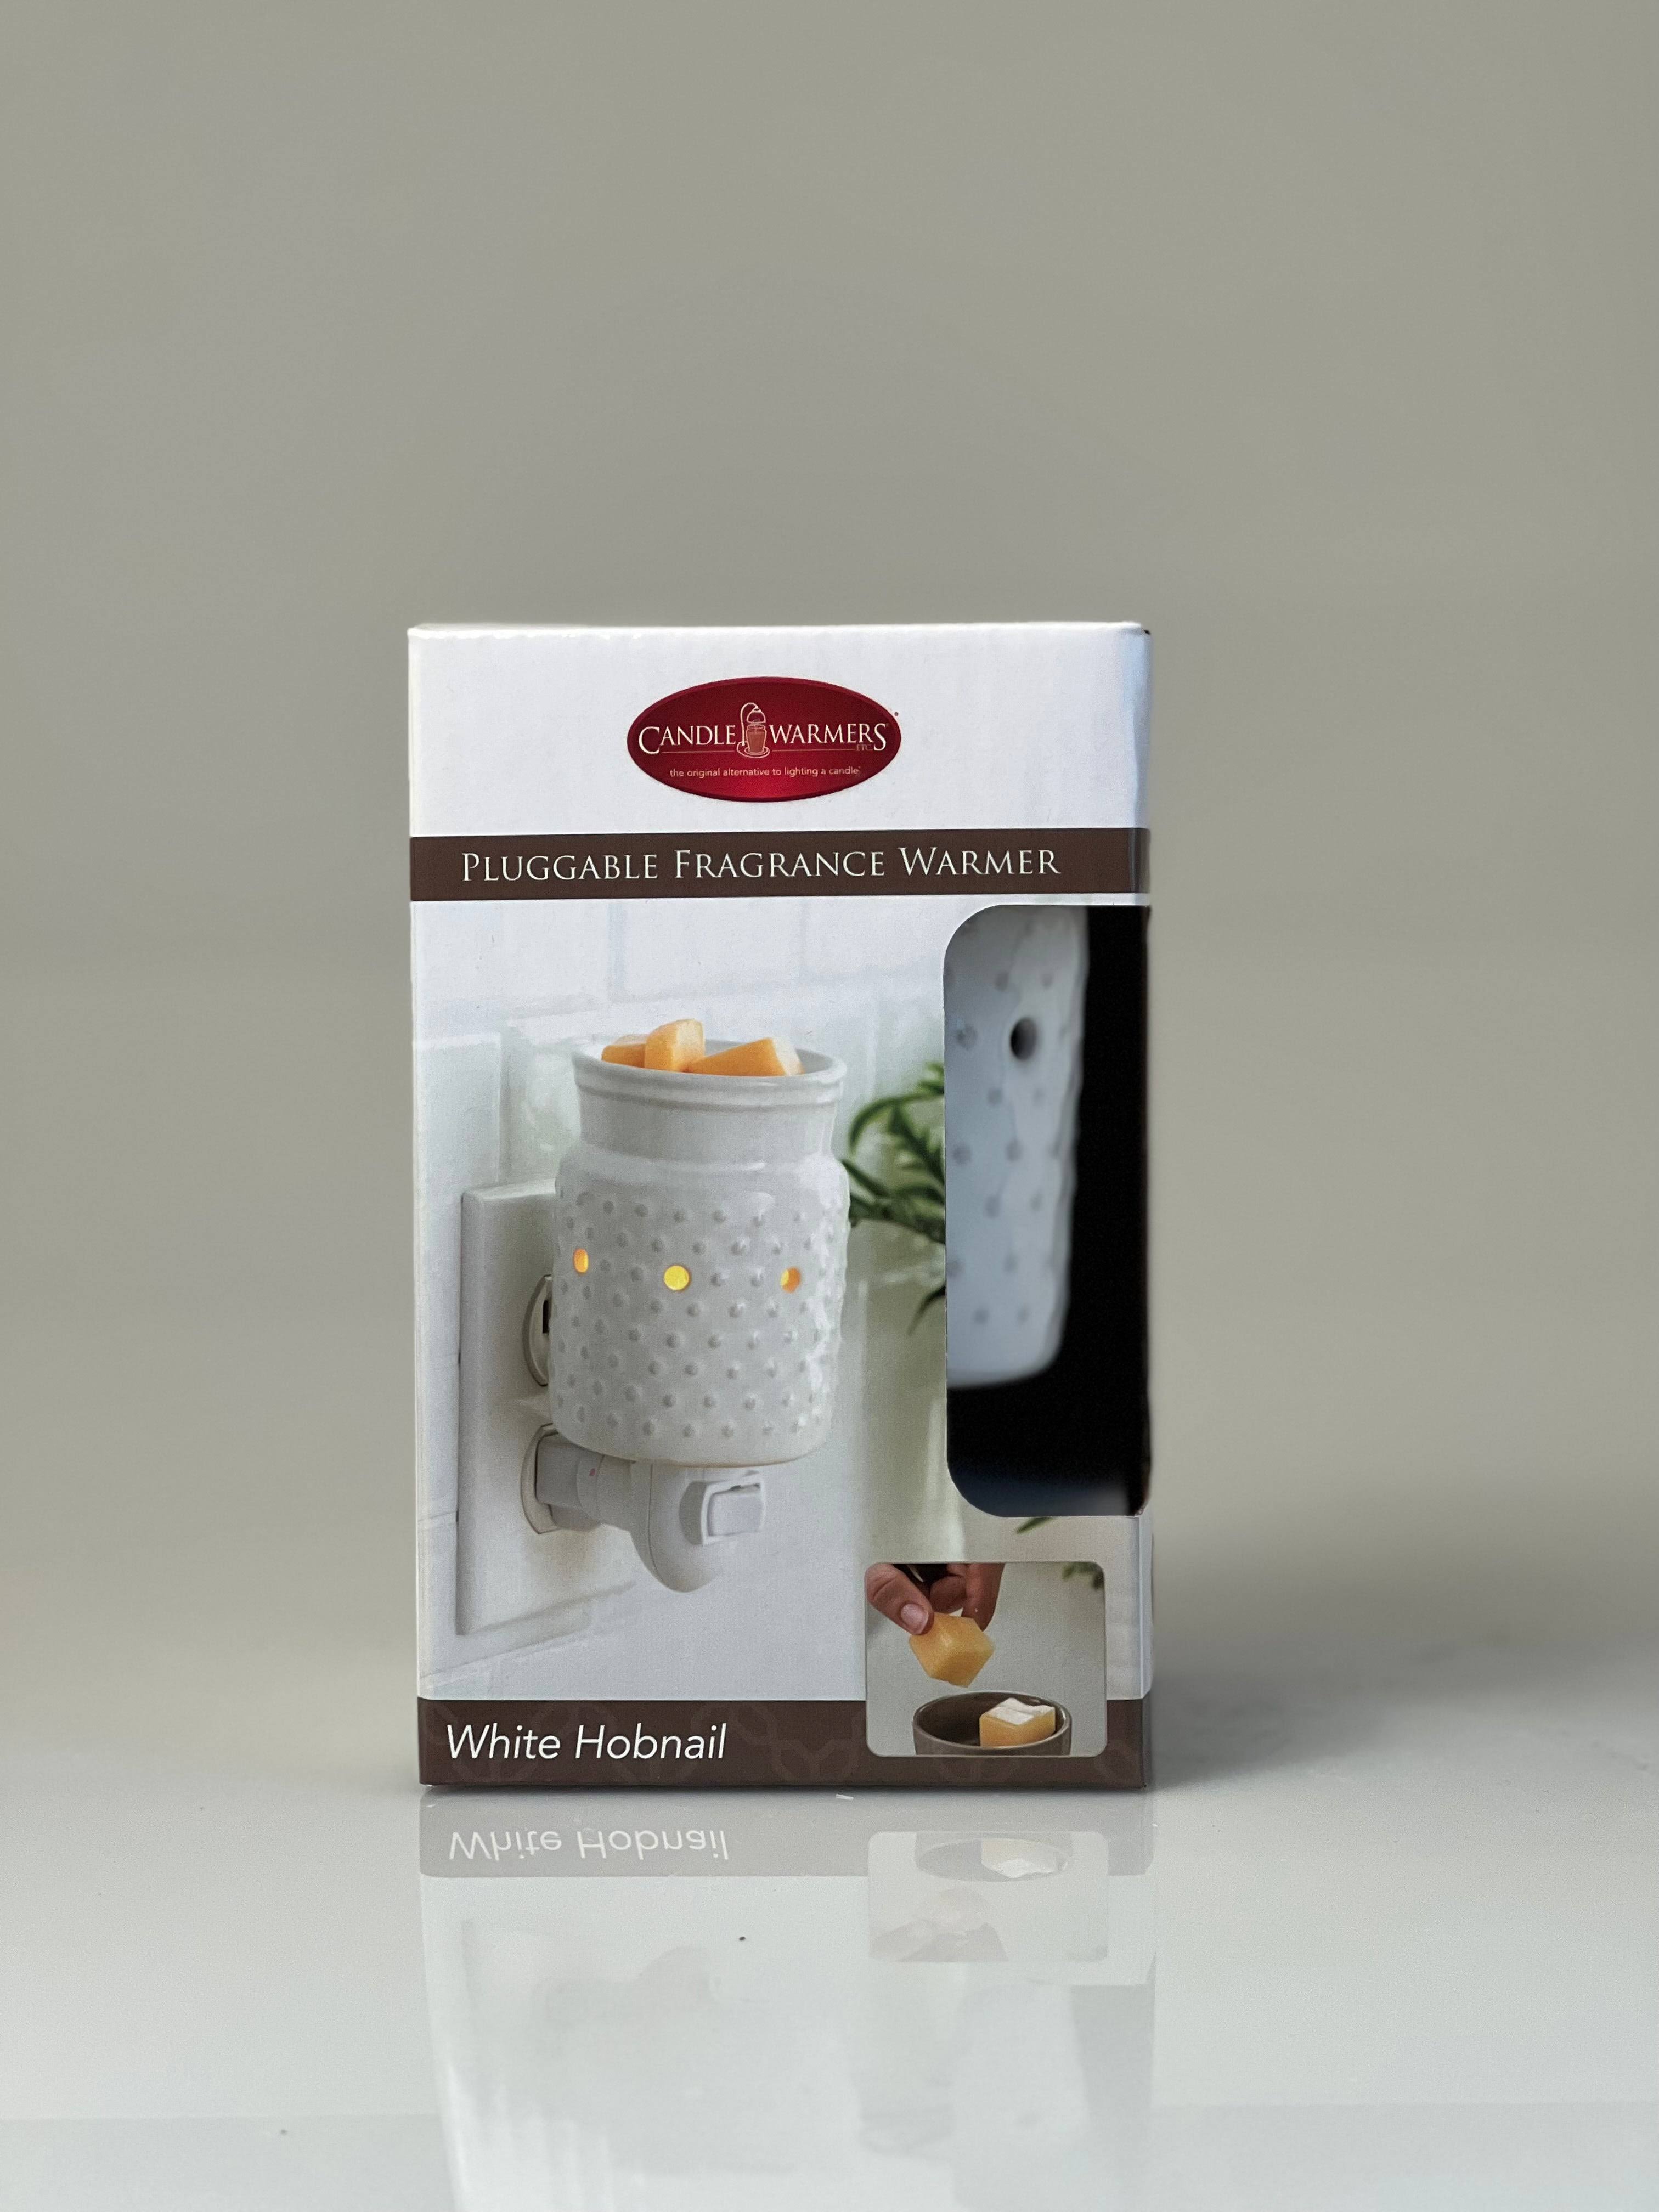 Candle Warmers Etc. White Hobnail Pluggable Fragrance Warmer